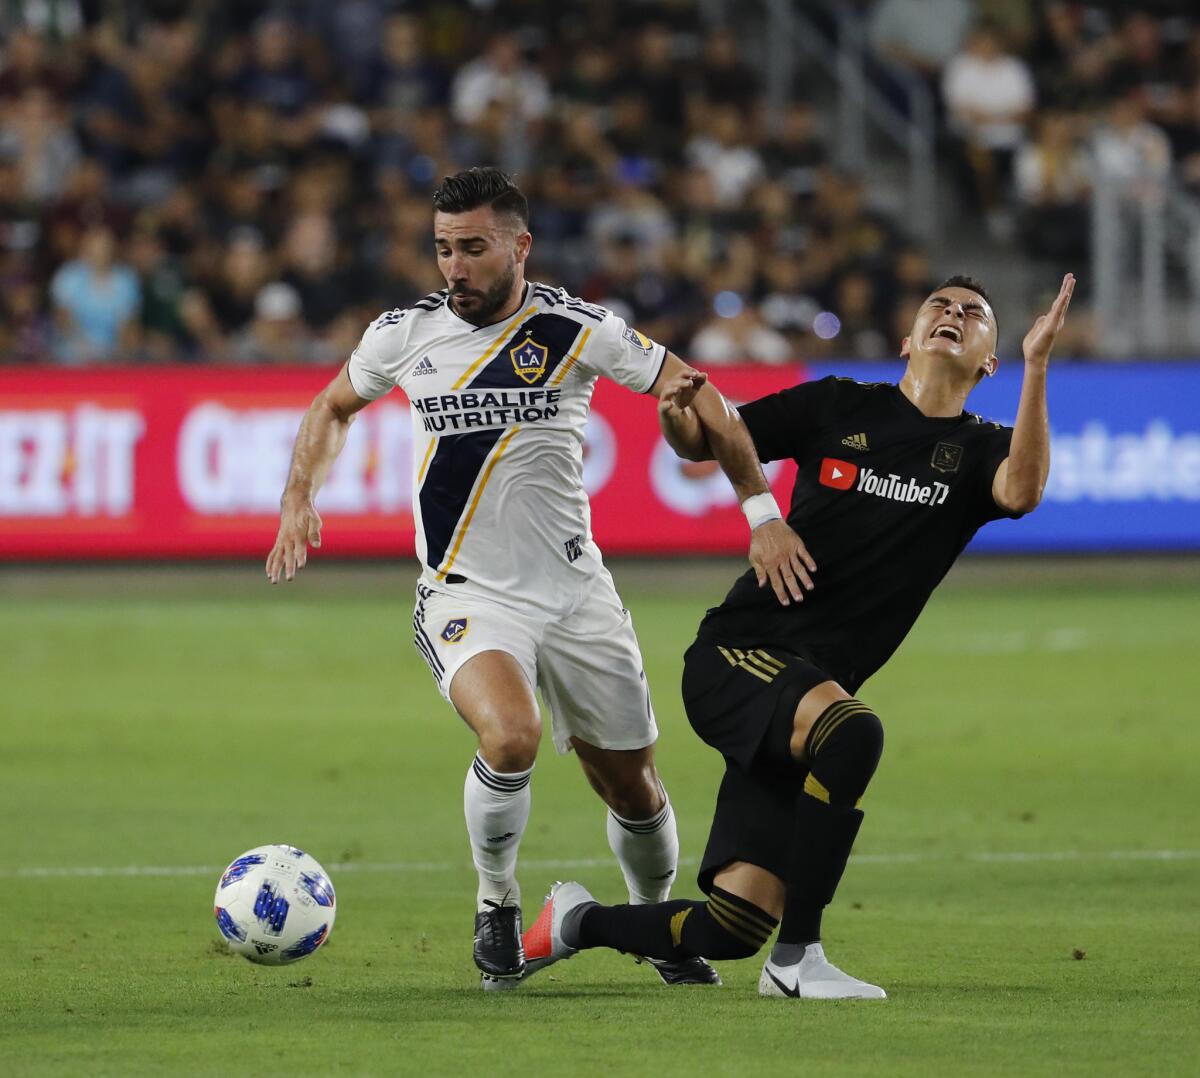 Galaxy midfielder Romain Alessandrini, left, battles LAFC midfielder Eduard Atuesta for control of the ball in the first half at the Banc of California Stadium on July 26, 2018.